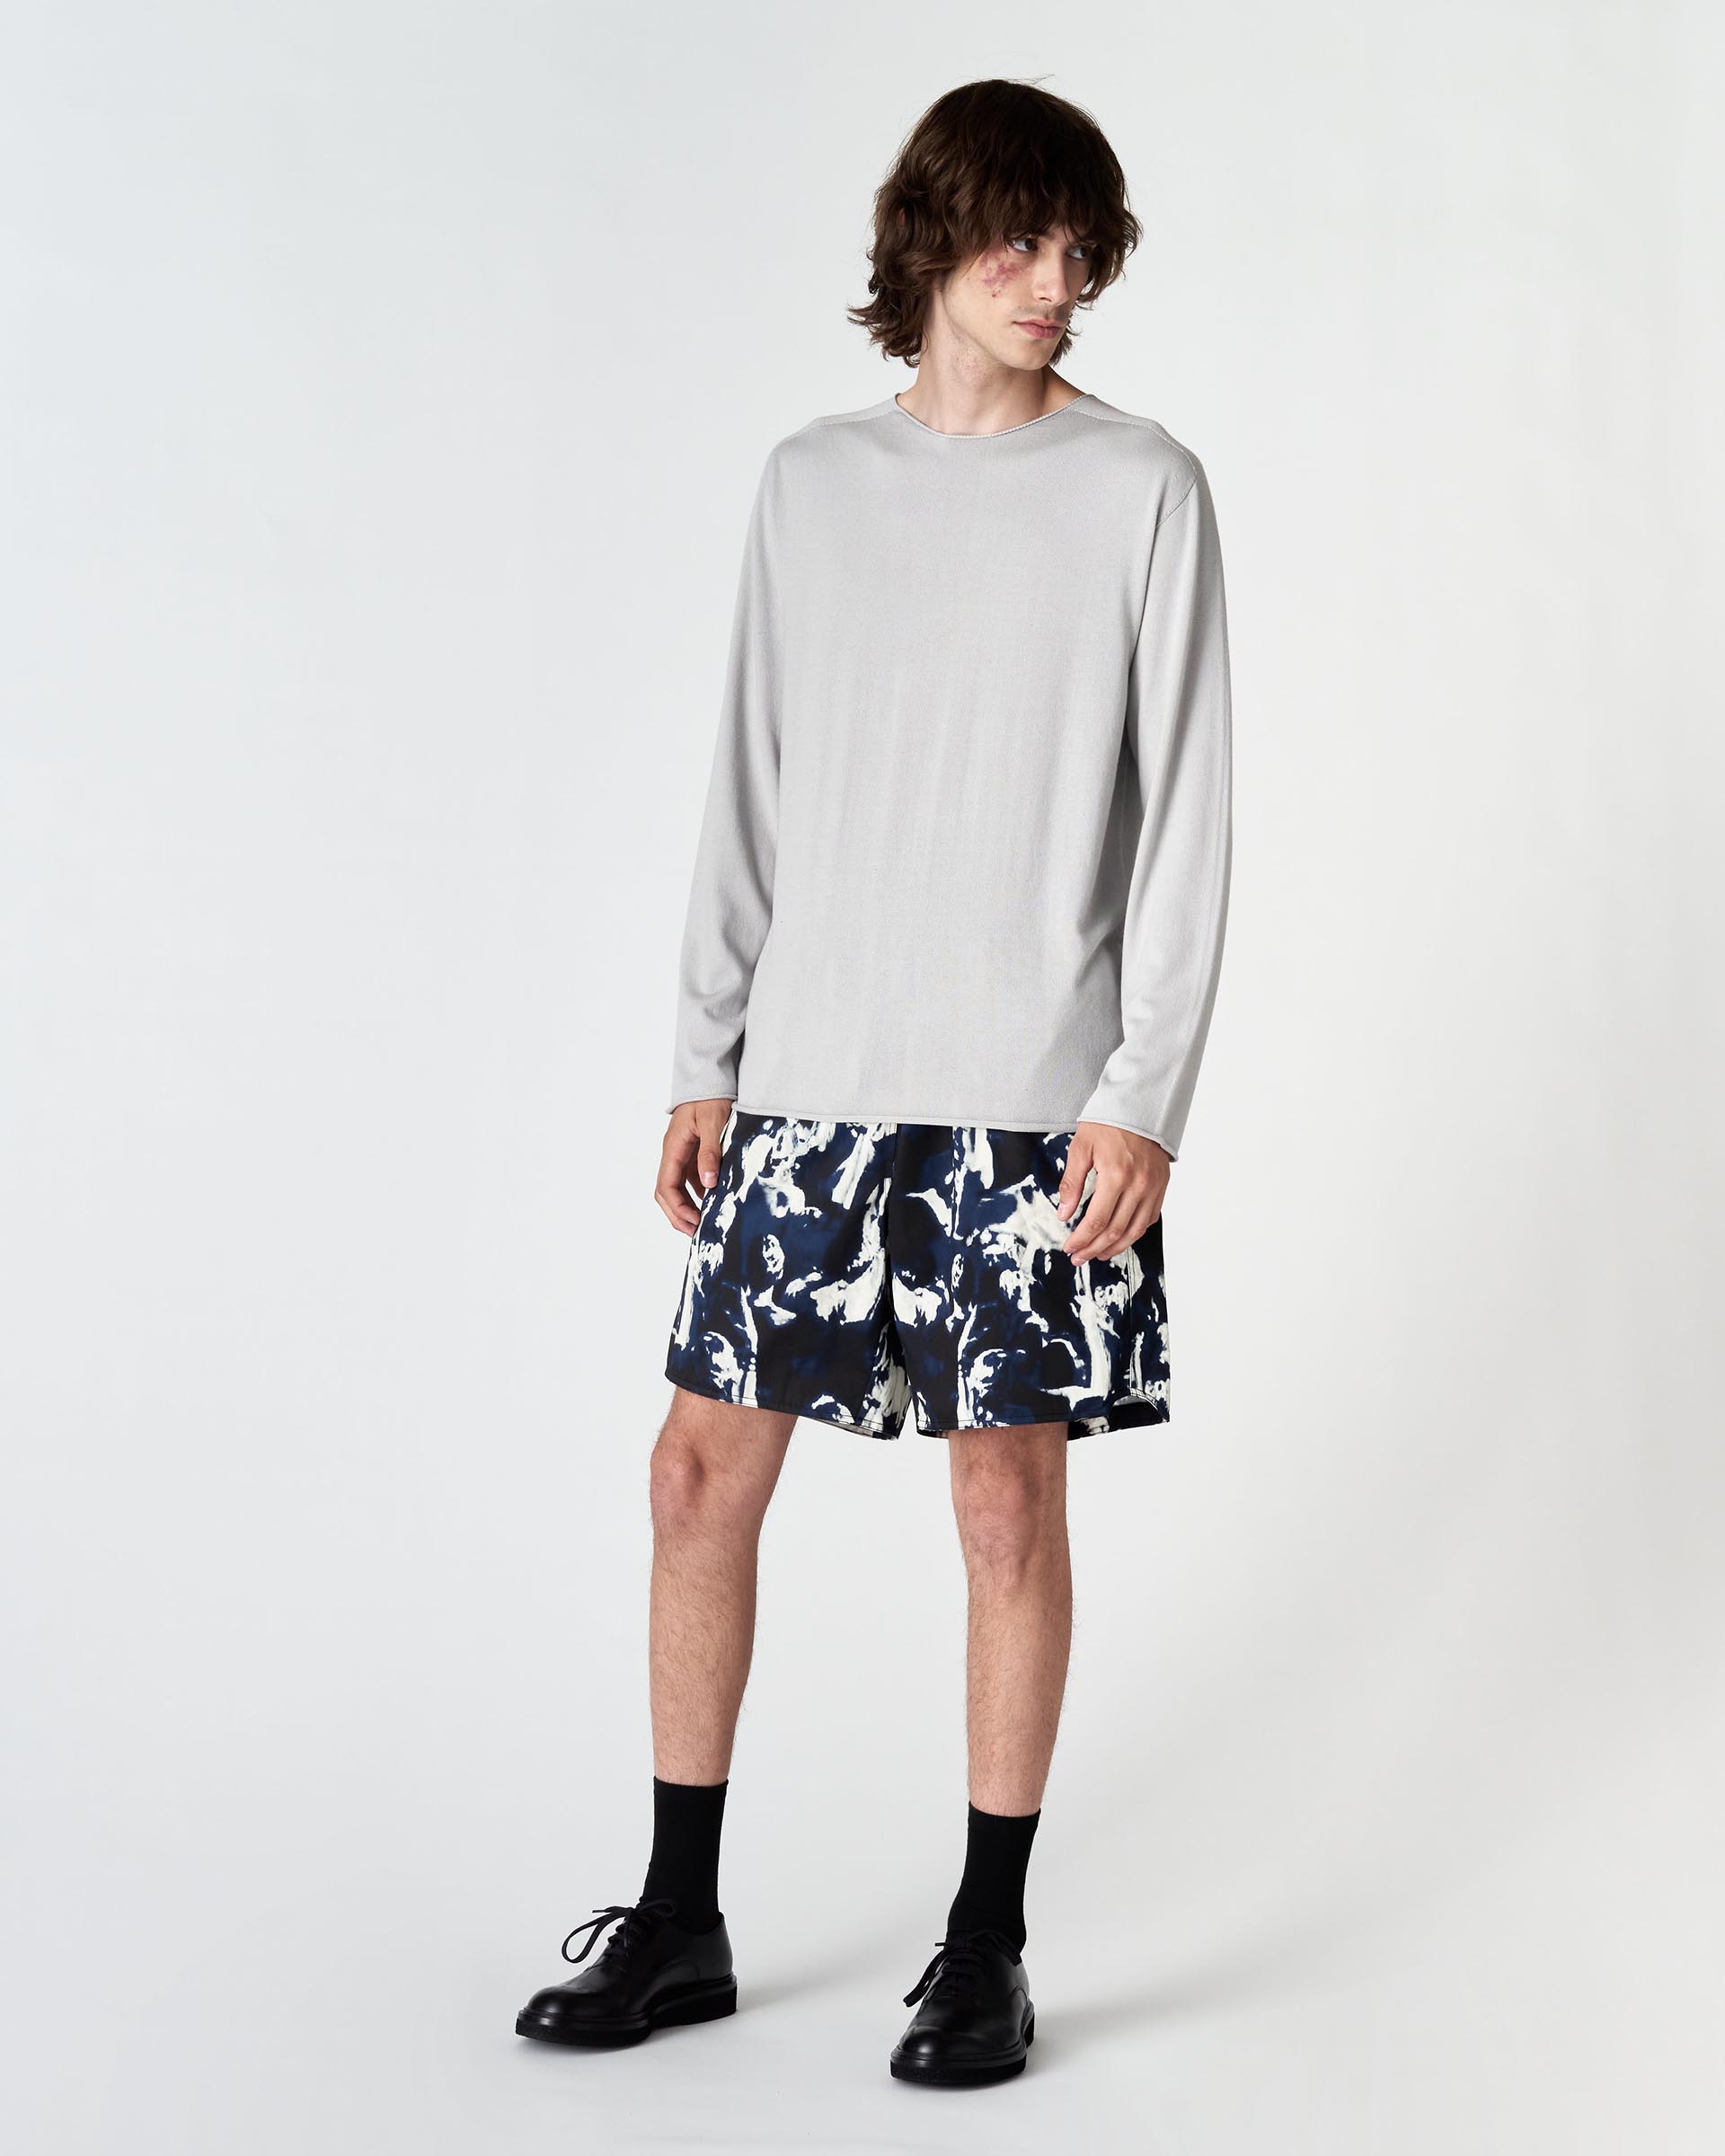 The Market Store | Crew Neck Sweater With Roll